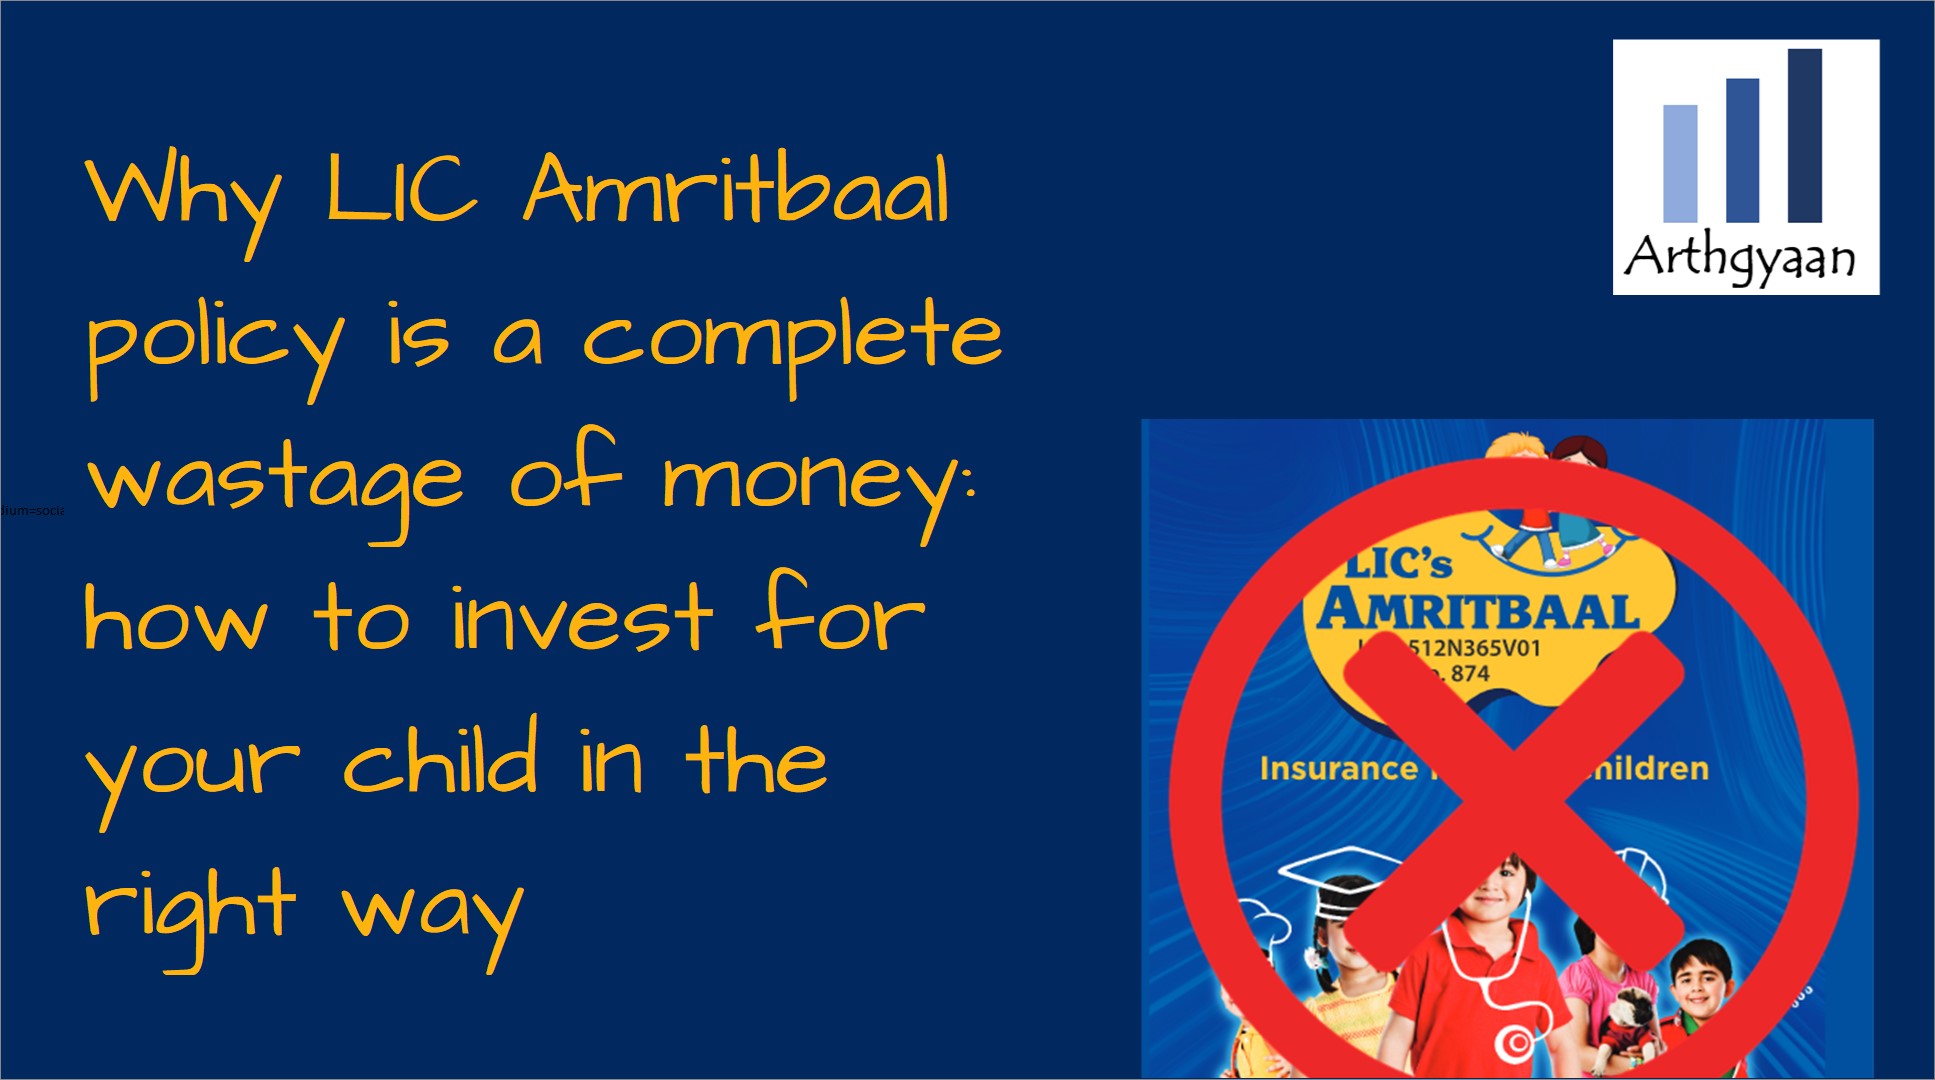 Why LIC Amritbaal policy is a complete wastage of money: how to invest for your child in the right way